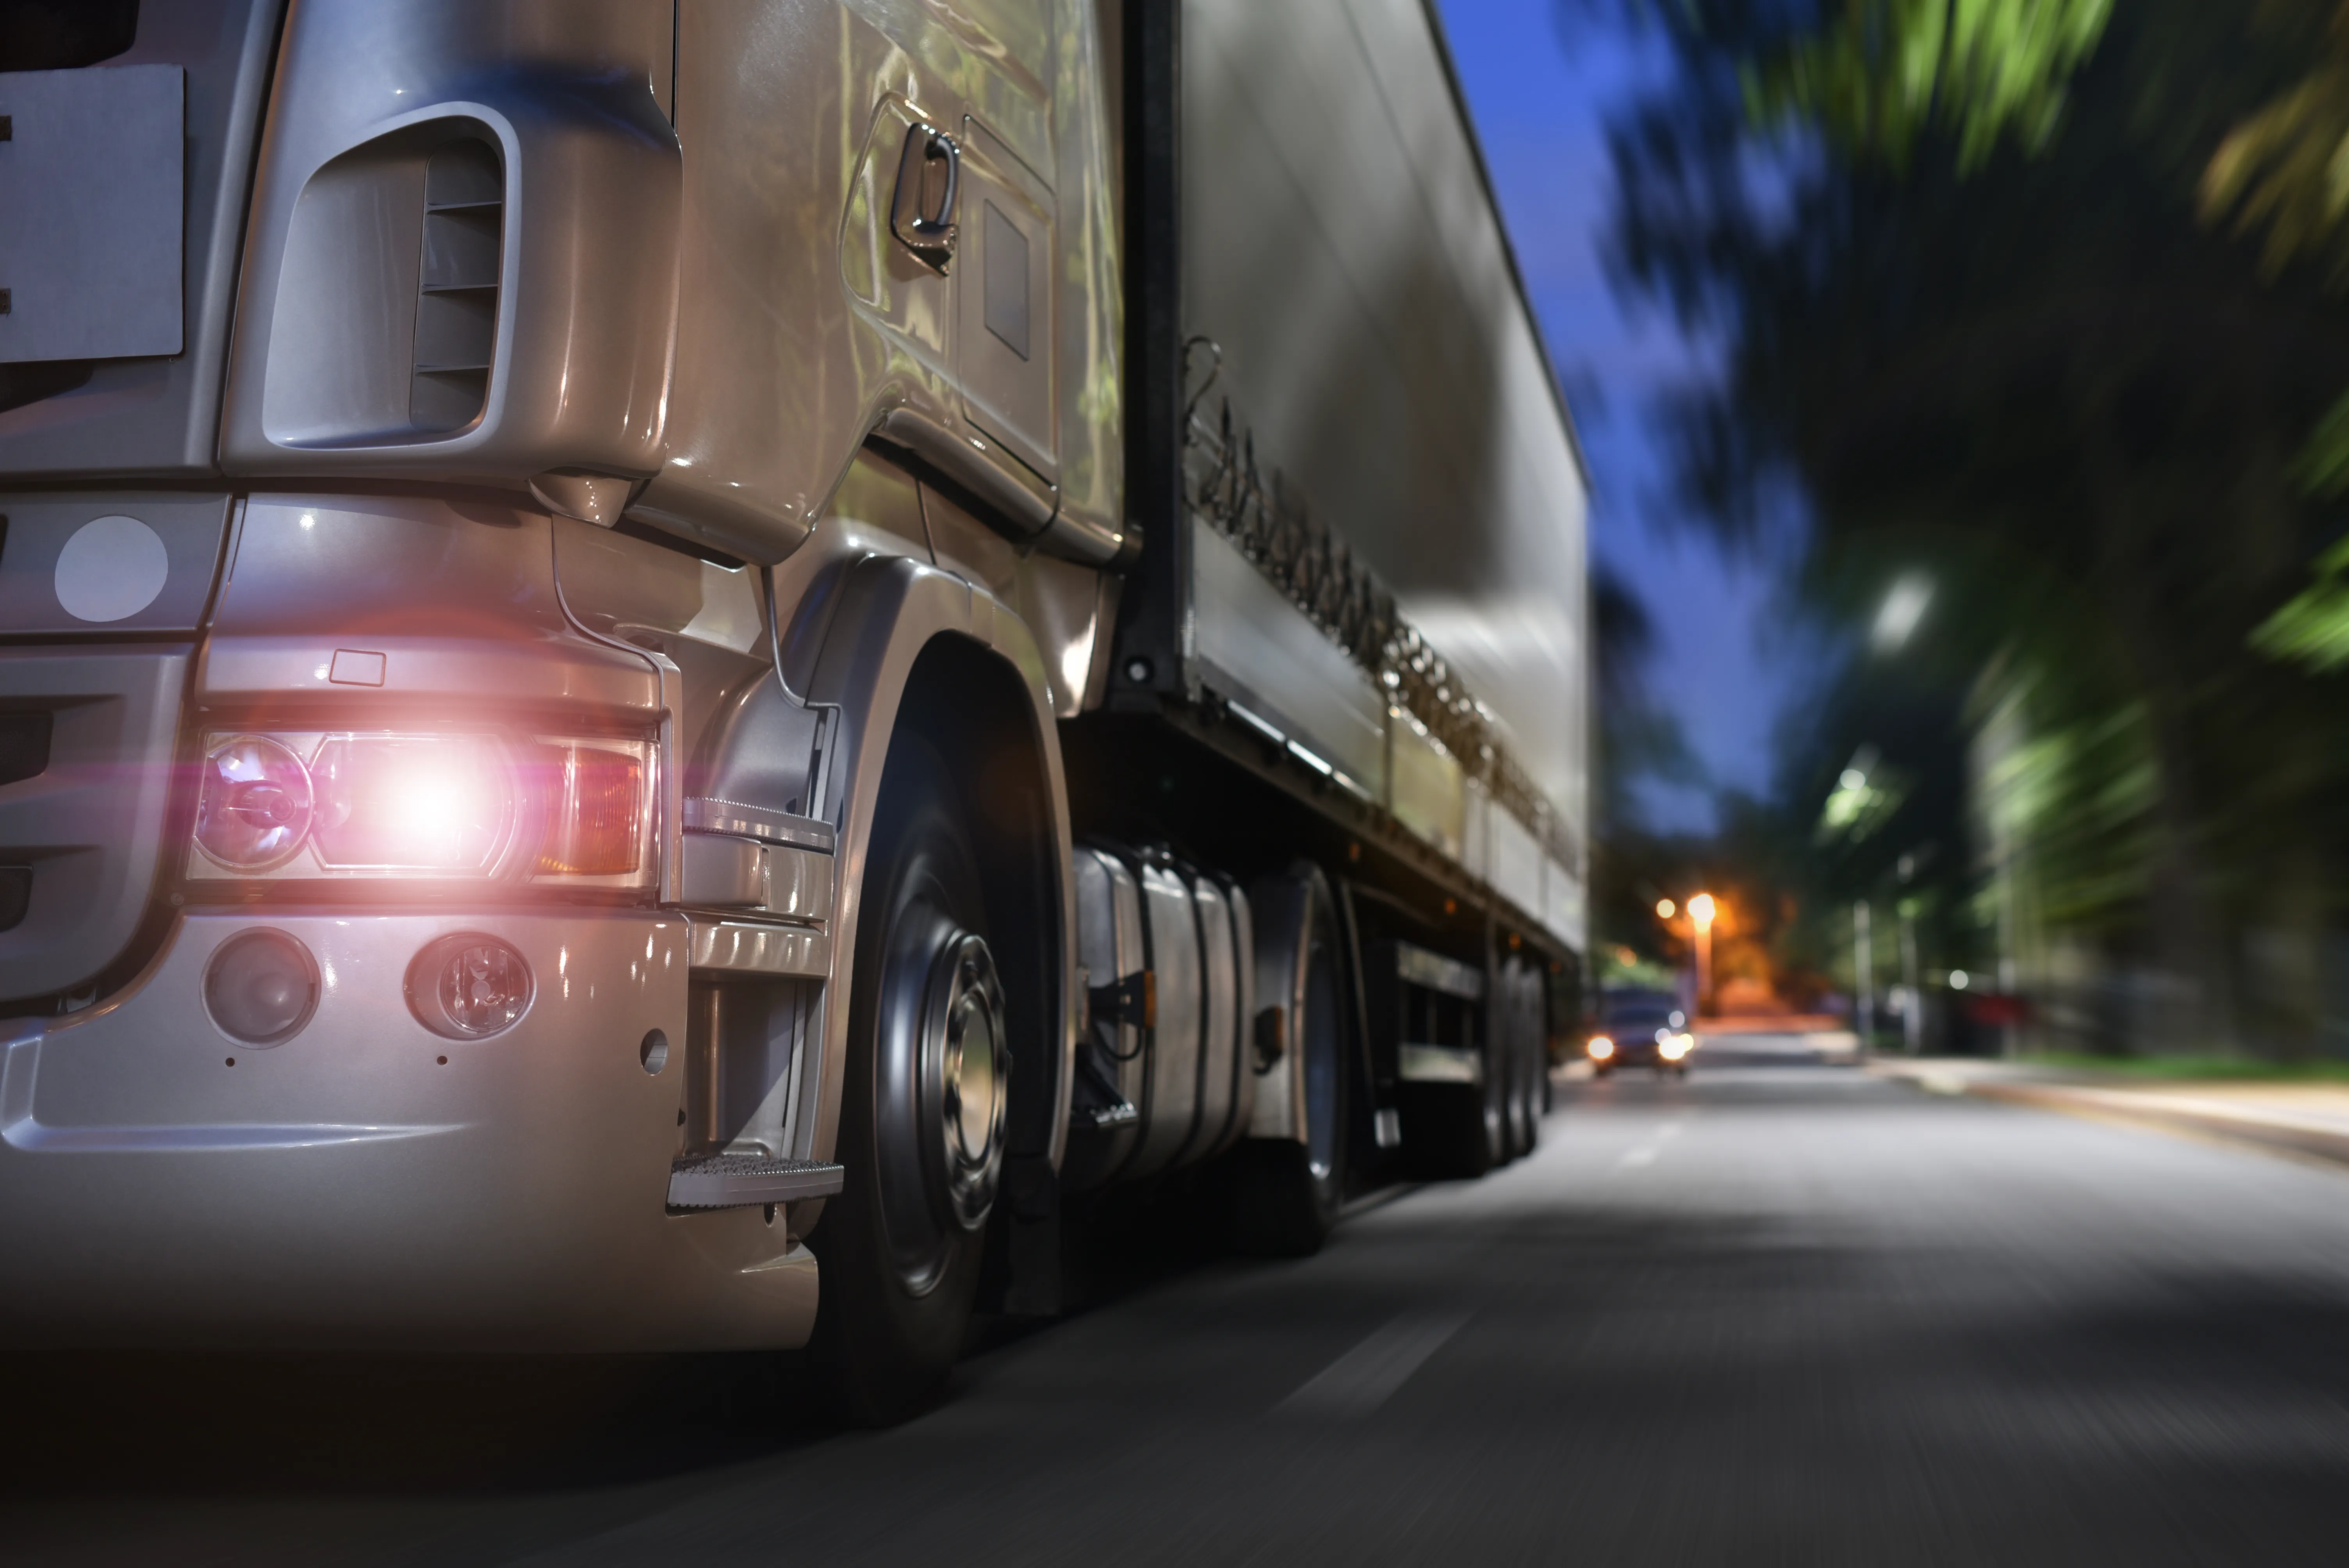 Truck Accident Lawyers: Understanding Your Legal Rights and Options